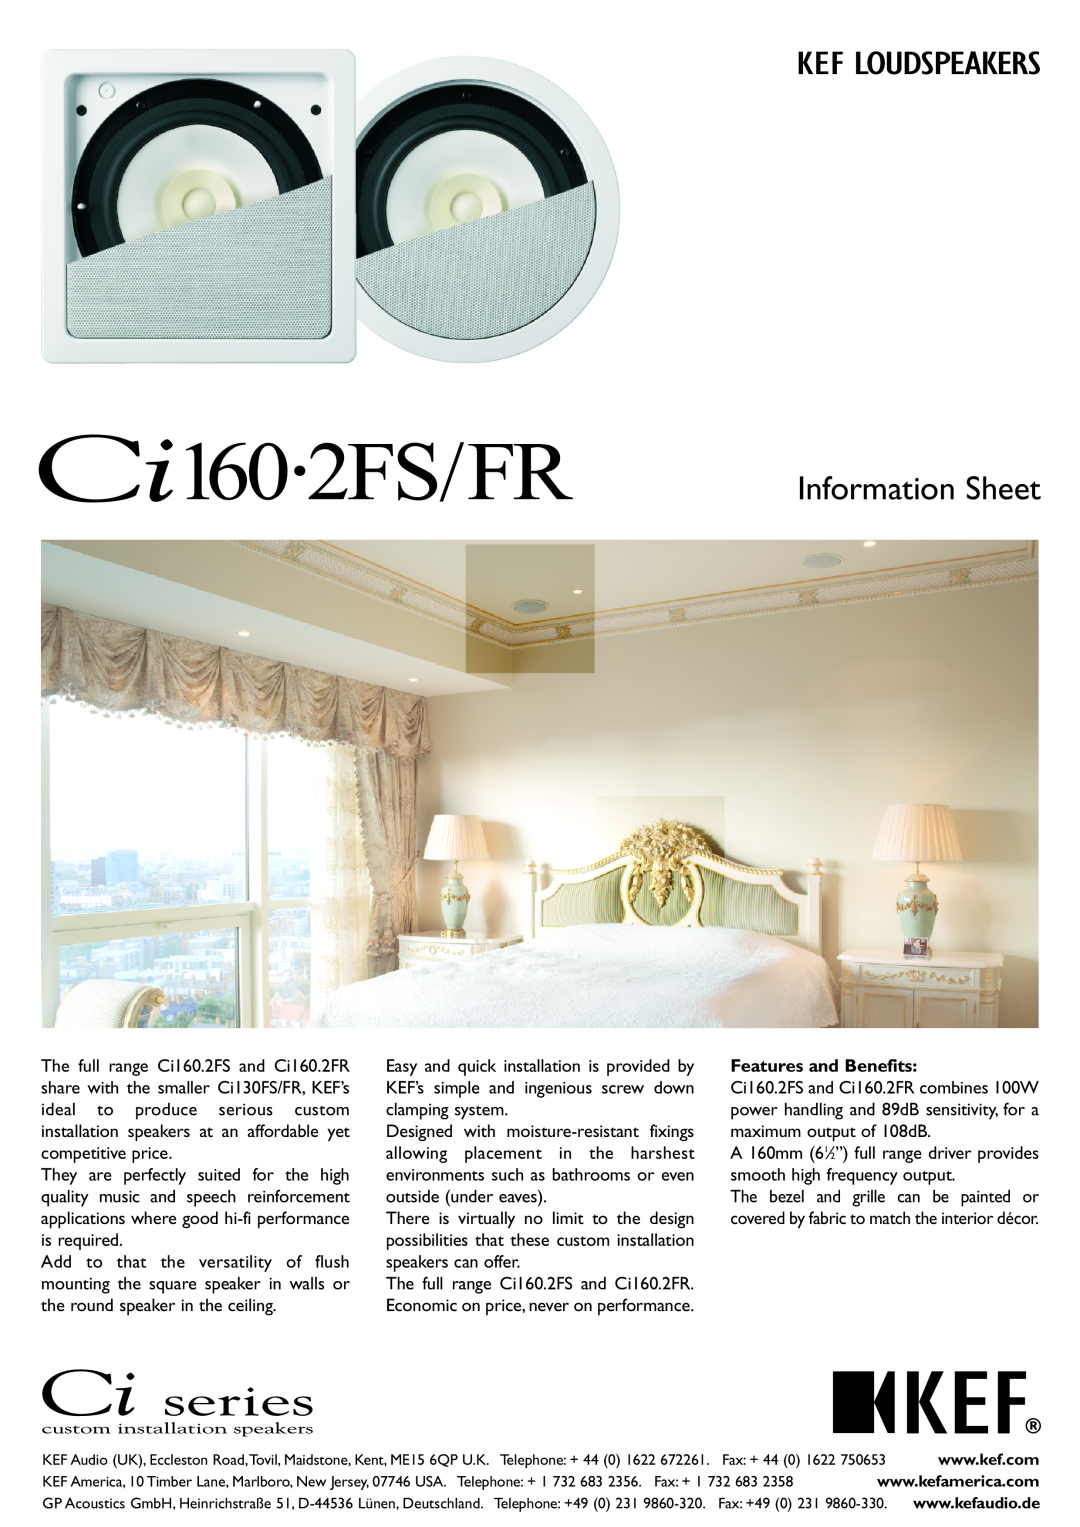 KEF Audio Ci160.2FR, Ci160.2FS manual Features and Benefits, Information Sheet 